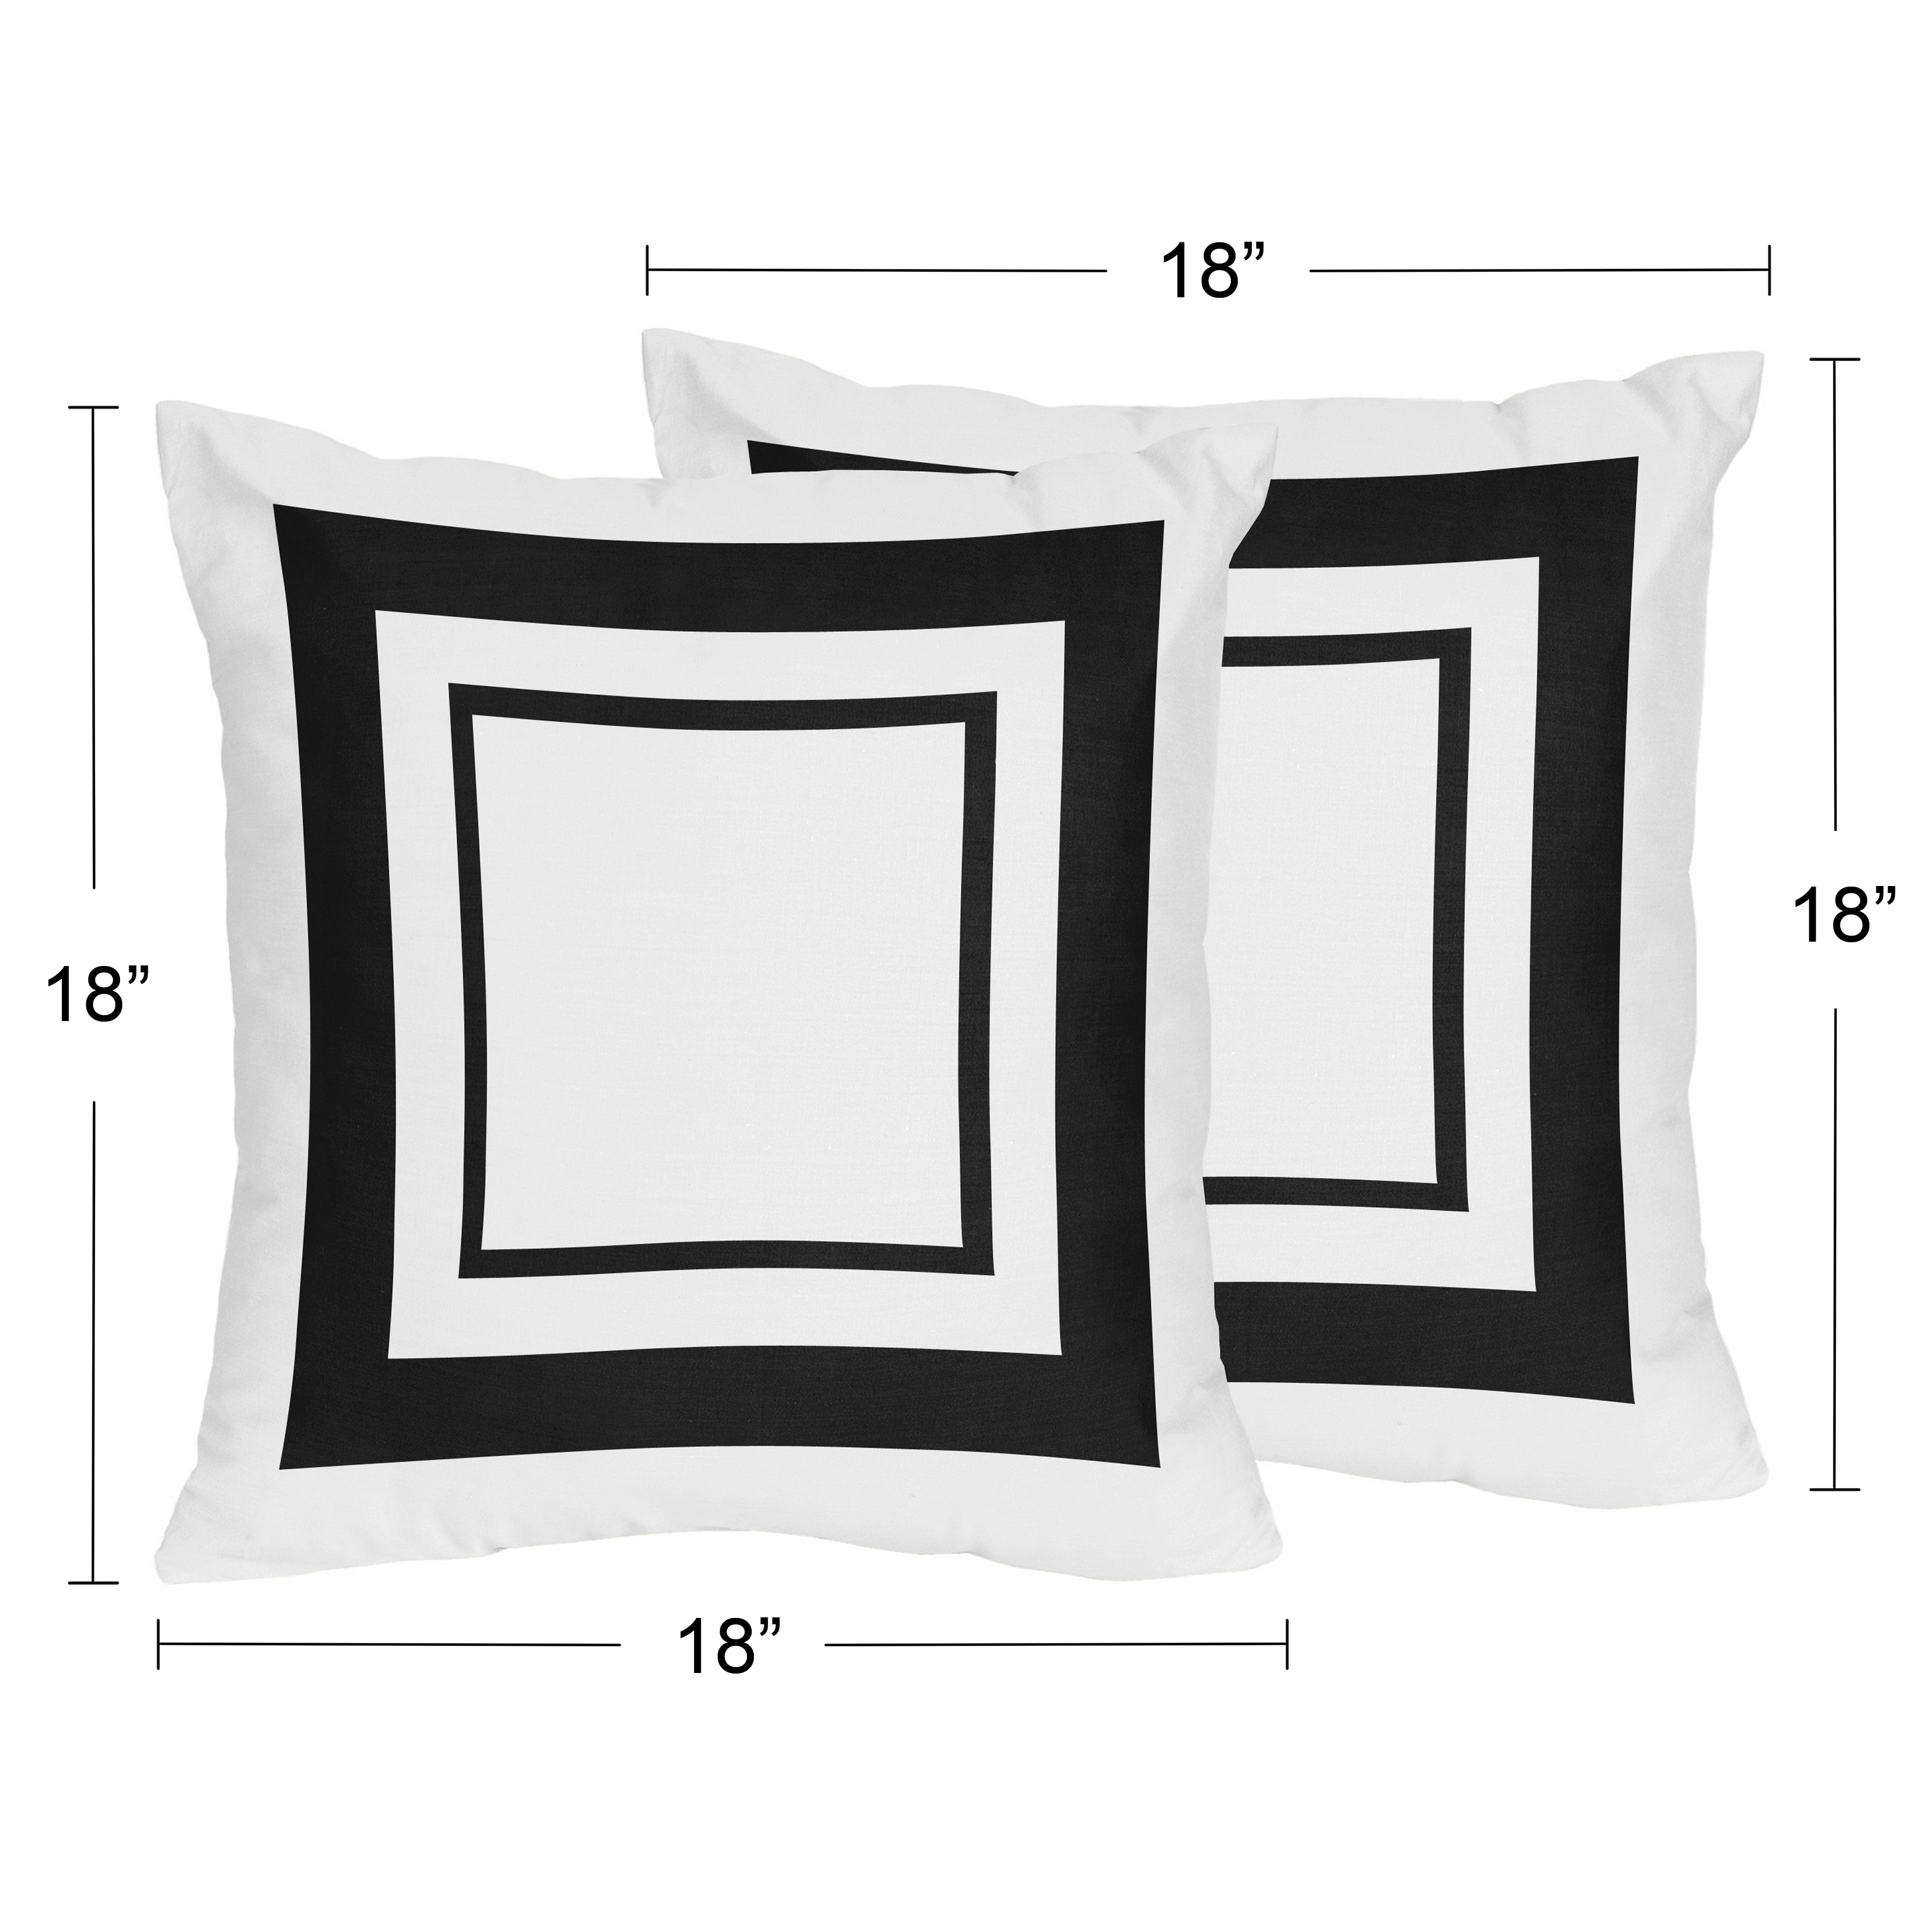 https://ak1.ostkcdn.com/images/products/is/images/direct/cfb4da9751700172519fead38fb097a17ddd560e/Sweet-Jojo-Designs-White-and-Black-Hotel-Decorative-Accent-Throw-Pillow-%28Set-of-2%29.jpg